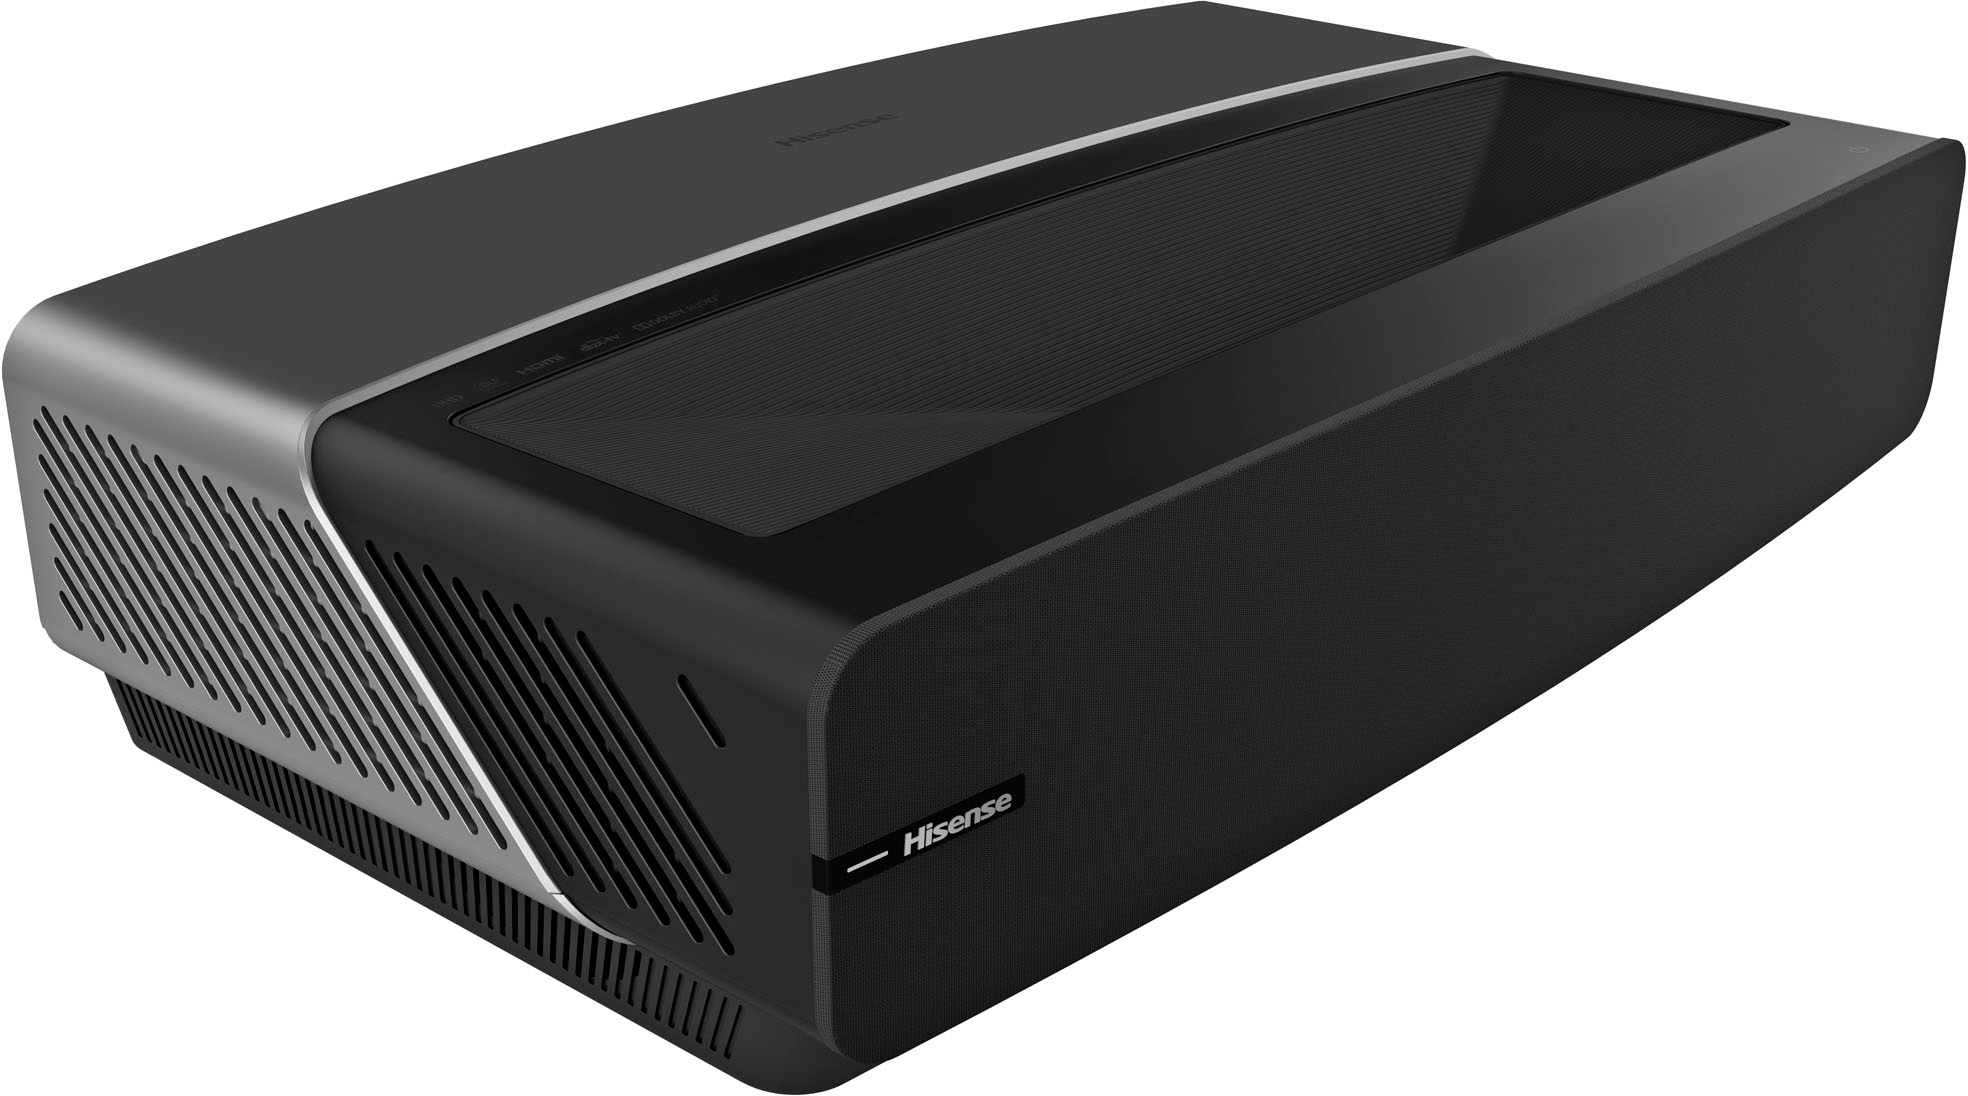 Angle View: Hisense - L5G Laser TV Ultra Short Throw Projector with 120" ALR Screen, 4K UHD, 2700 Lumens, HDR10, Android TV - Black